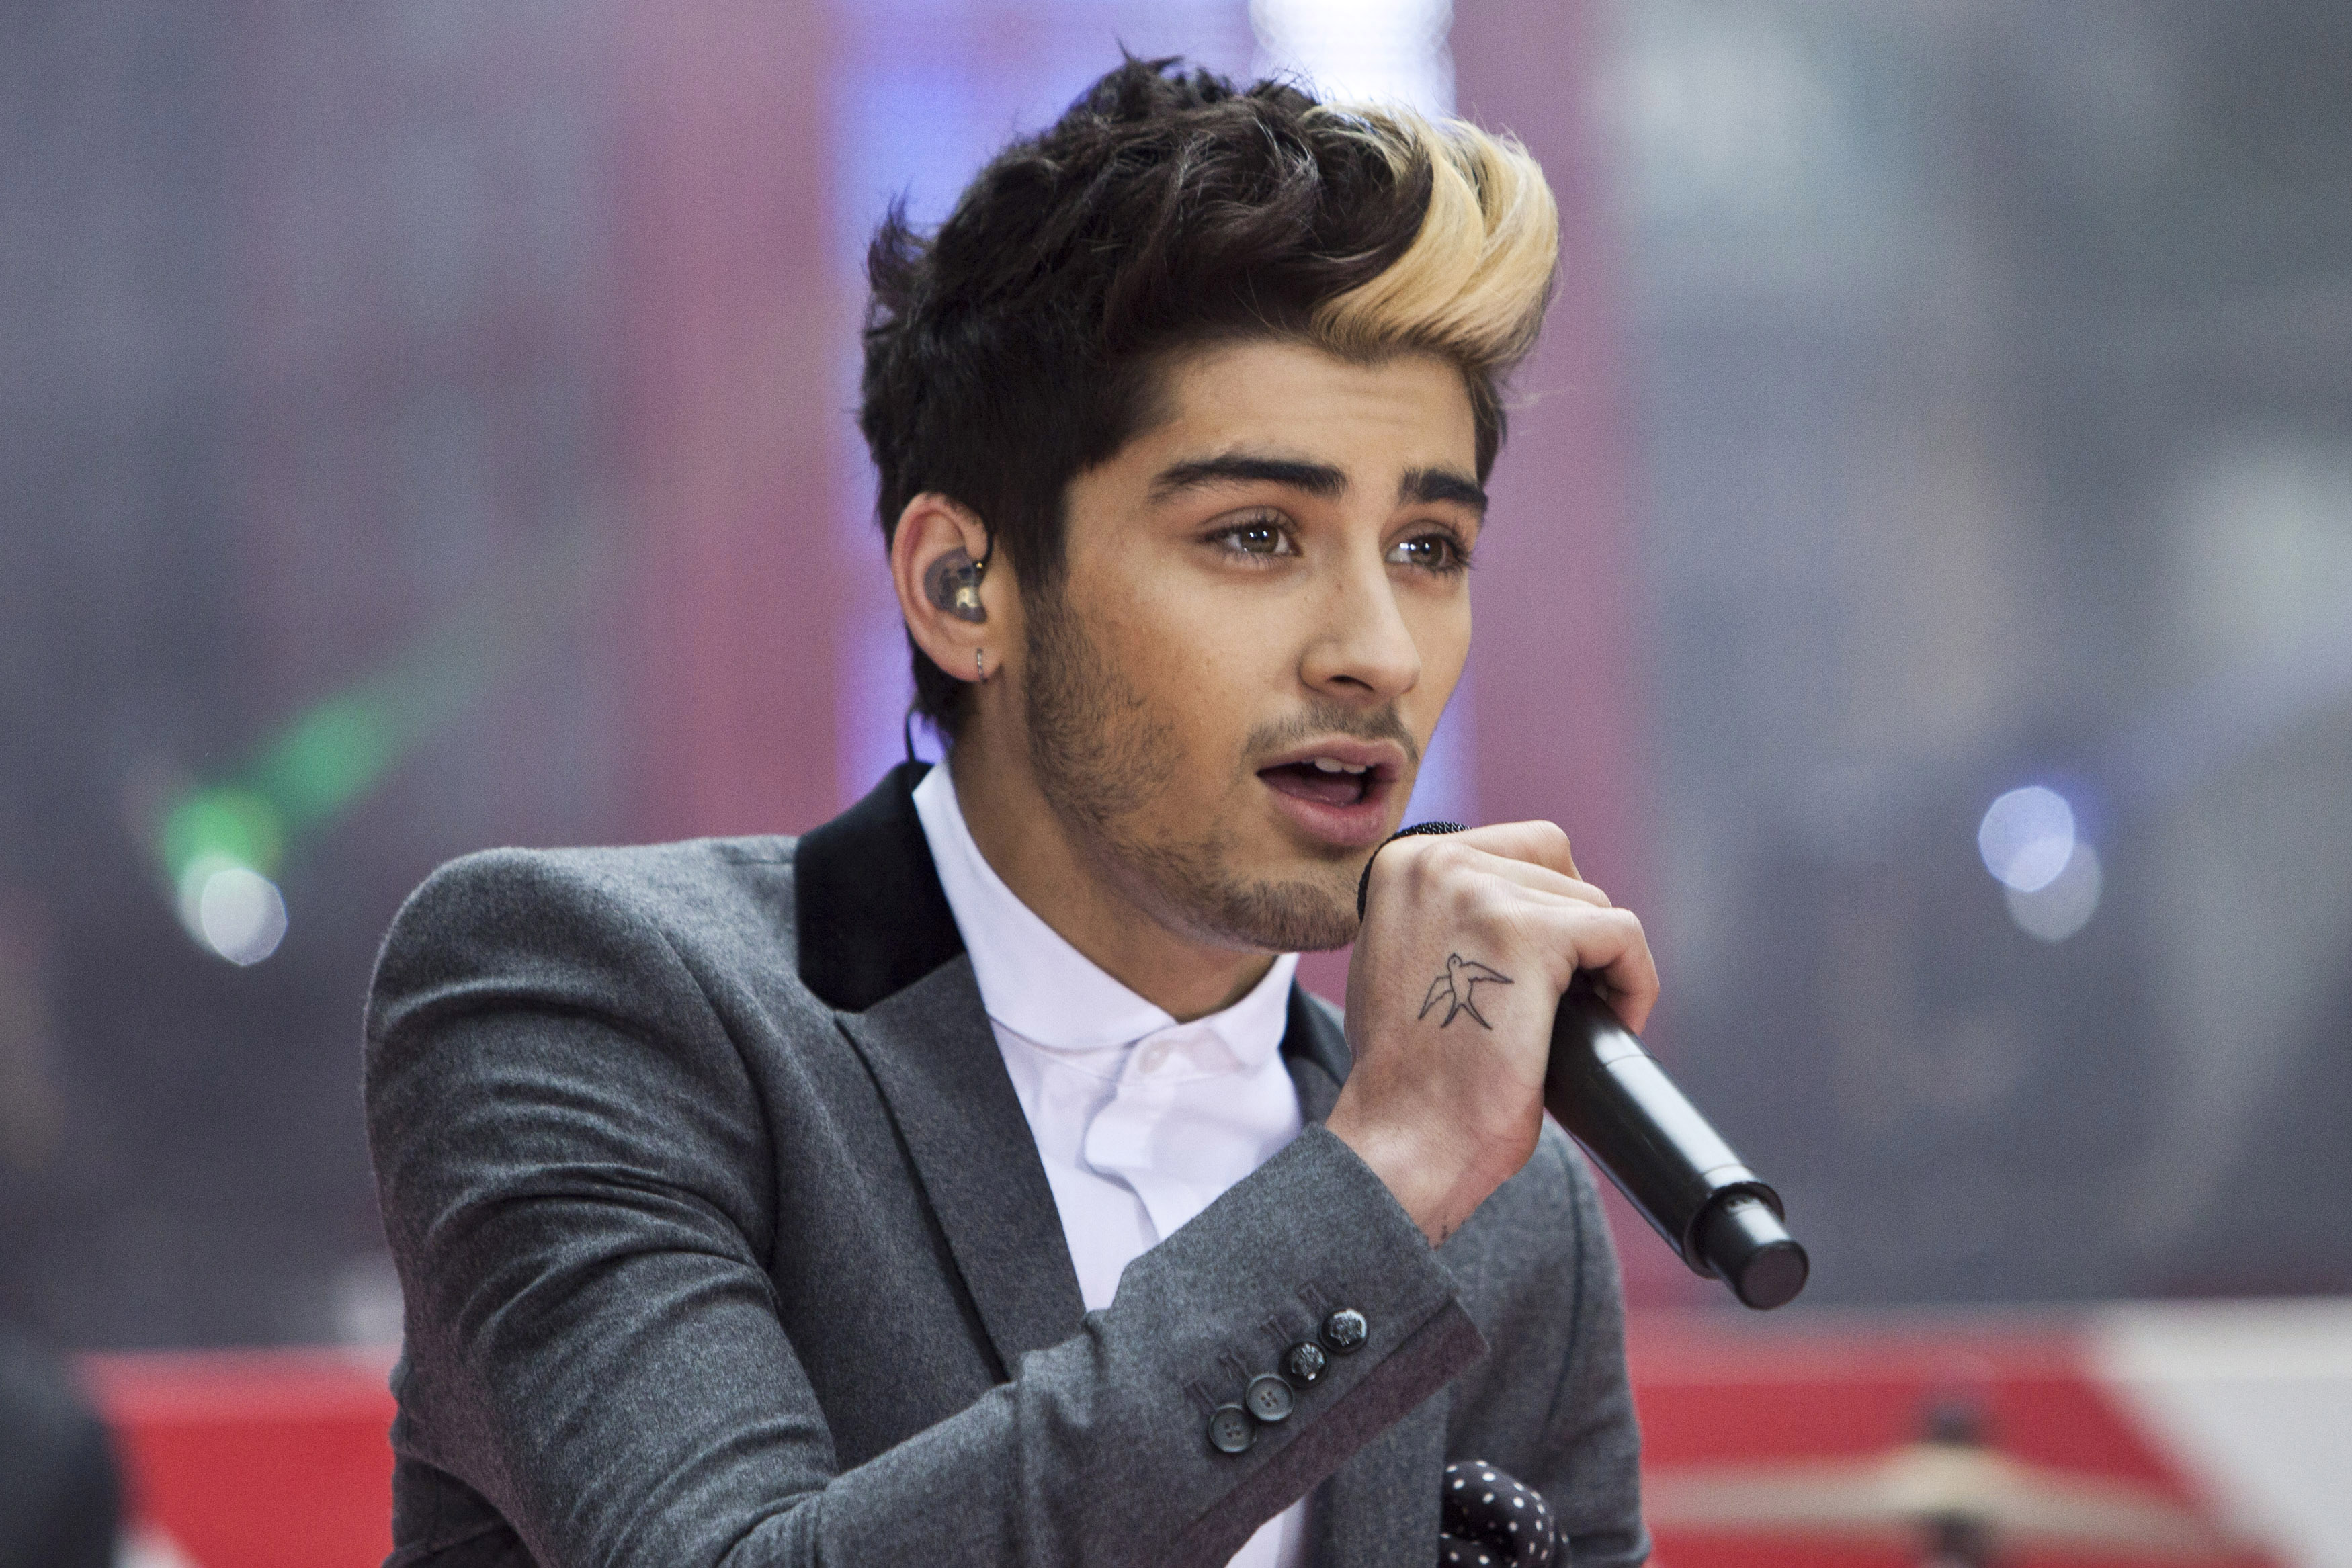 Malik performs with his band, "One Direction" on NBC's Today show in New York